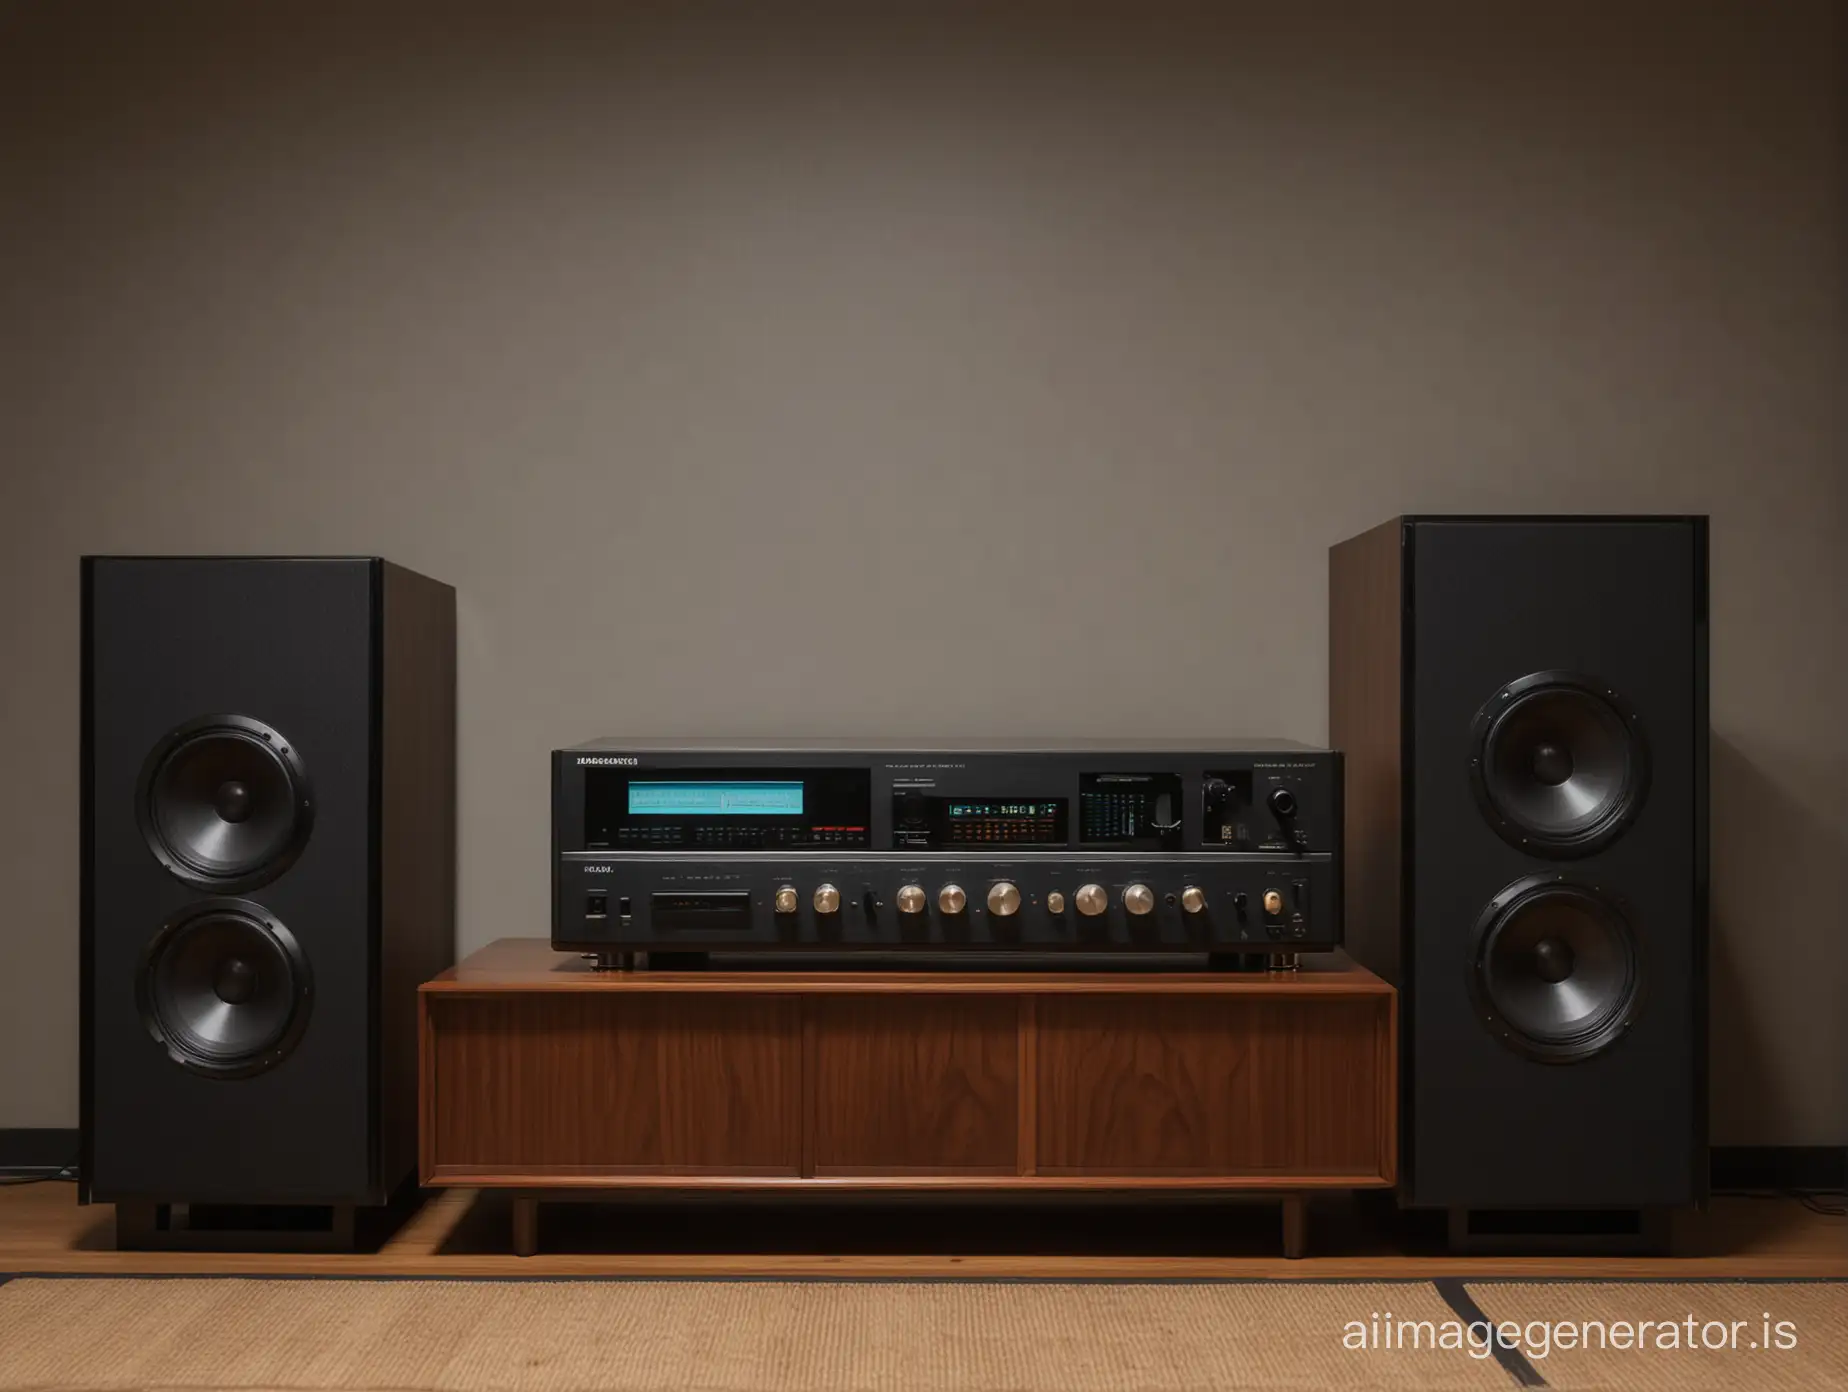 A 70's Japanese stereo system with 2 separate loudspeakers in a dark room with display front view